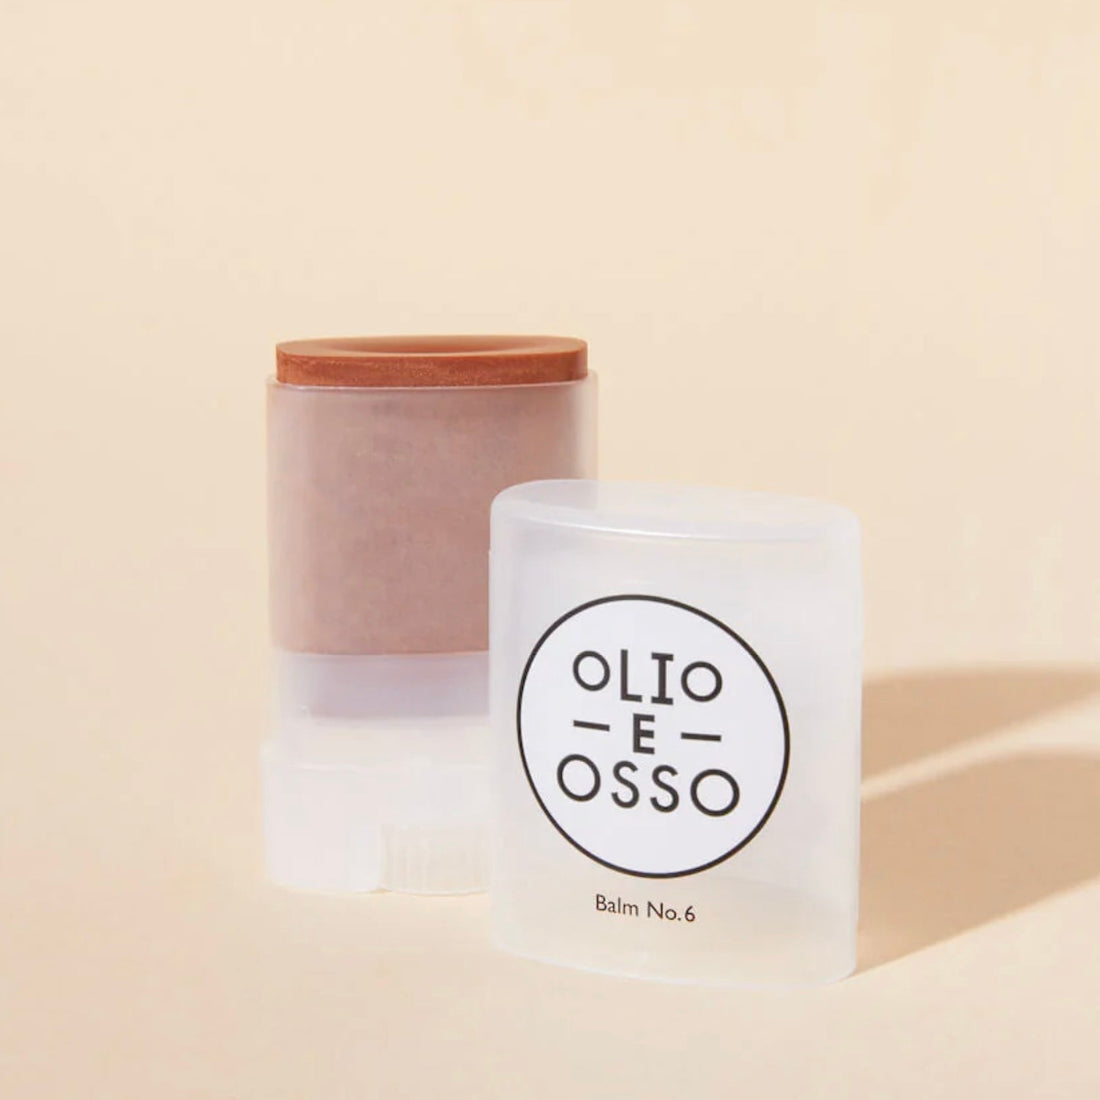 Olio E Osso - Shimmer Beauty Balm - The Flower Crate